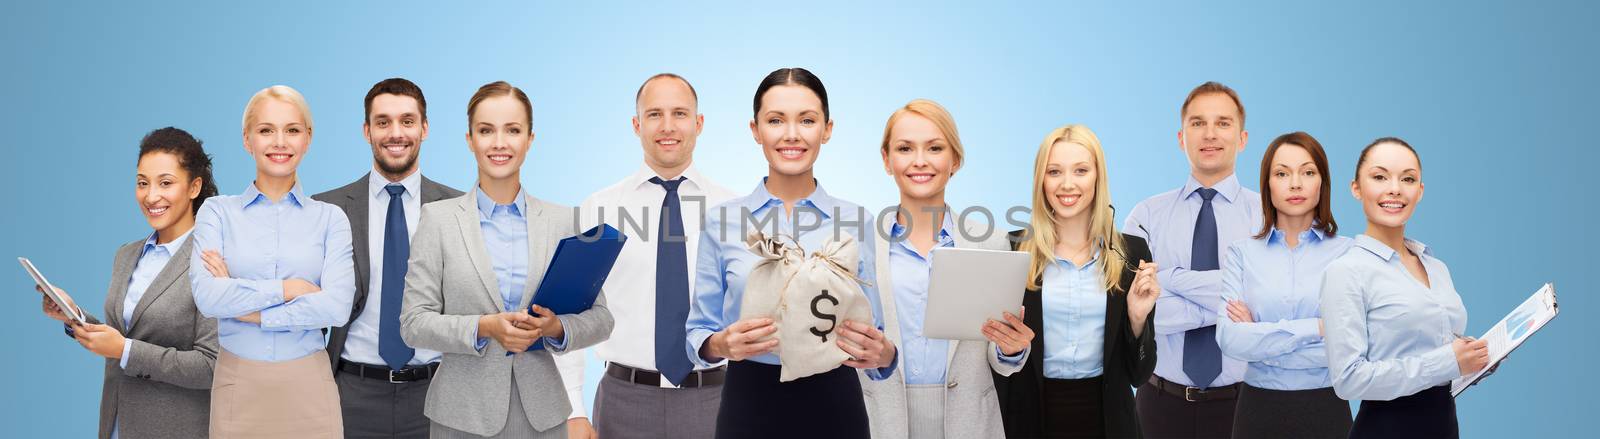 business, people, finances and banking concept - group of happy businesspeople with money bags over blue background